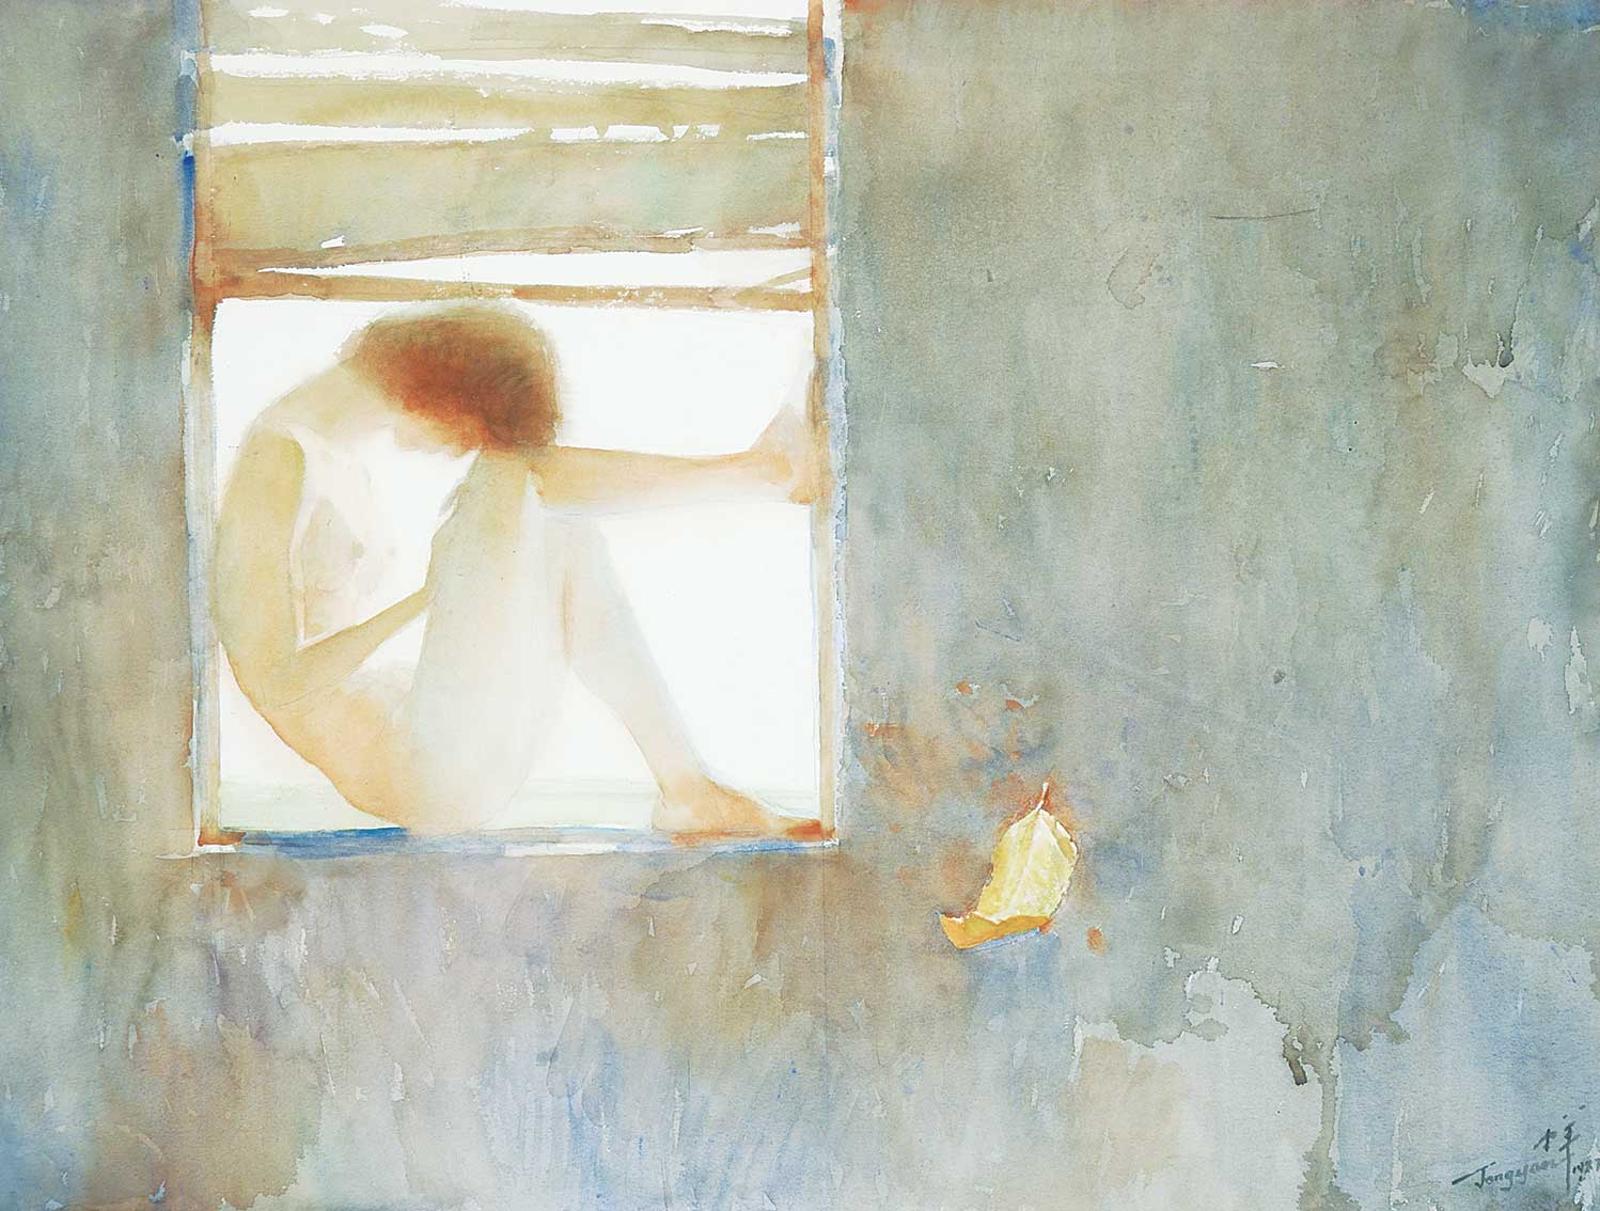 Zhong Young Huang (1949) - Untitled - In the Window